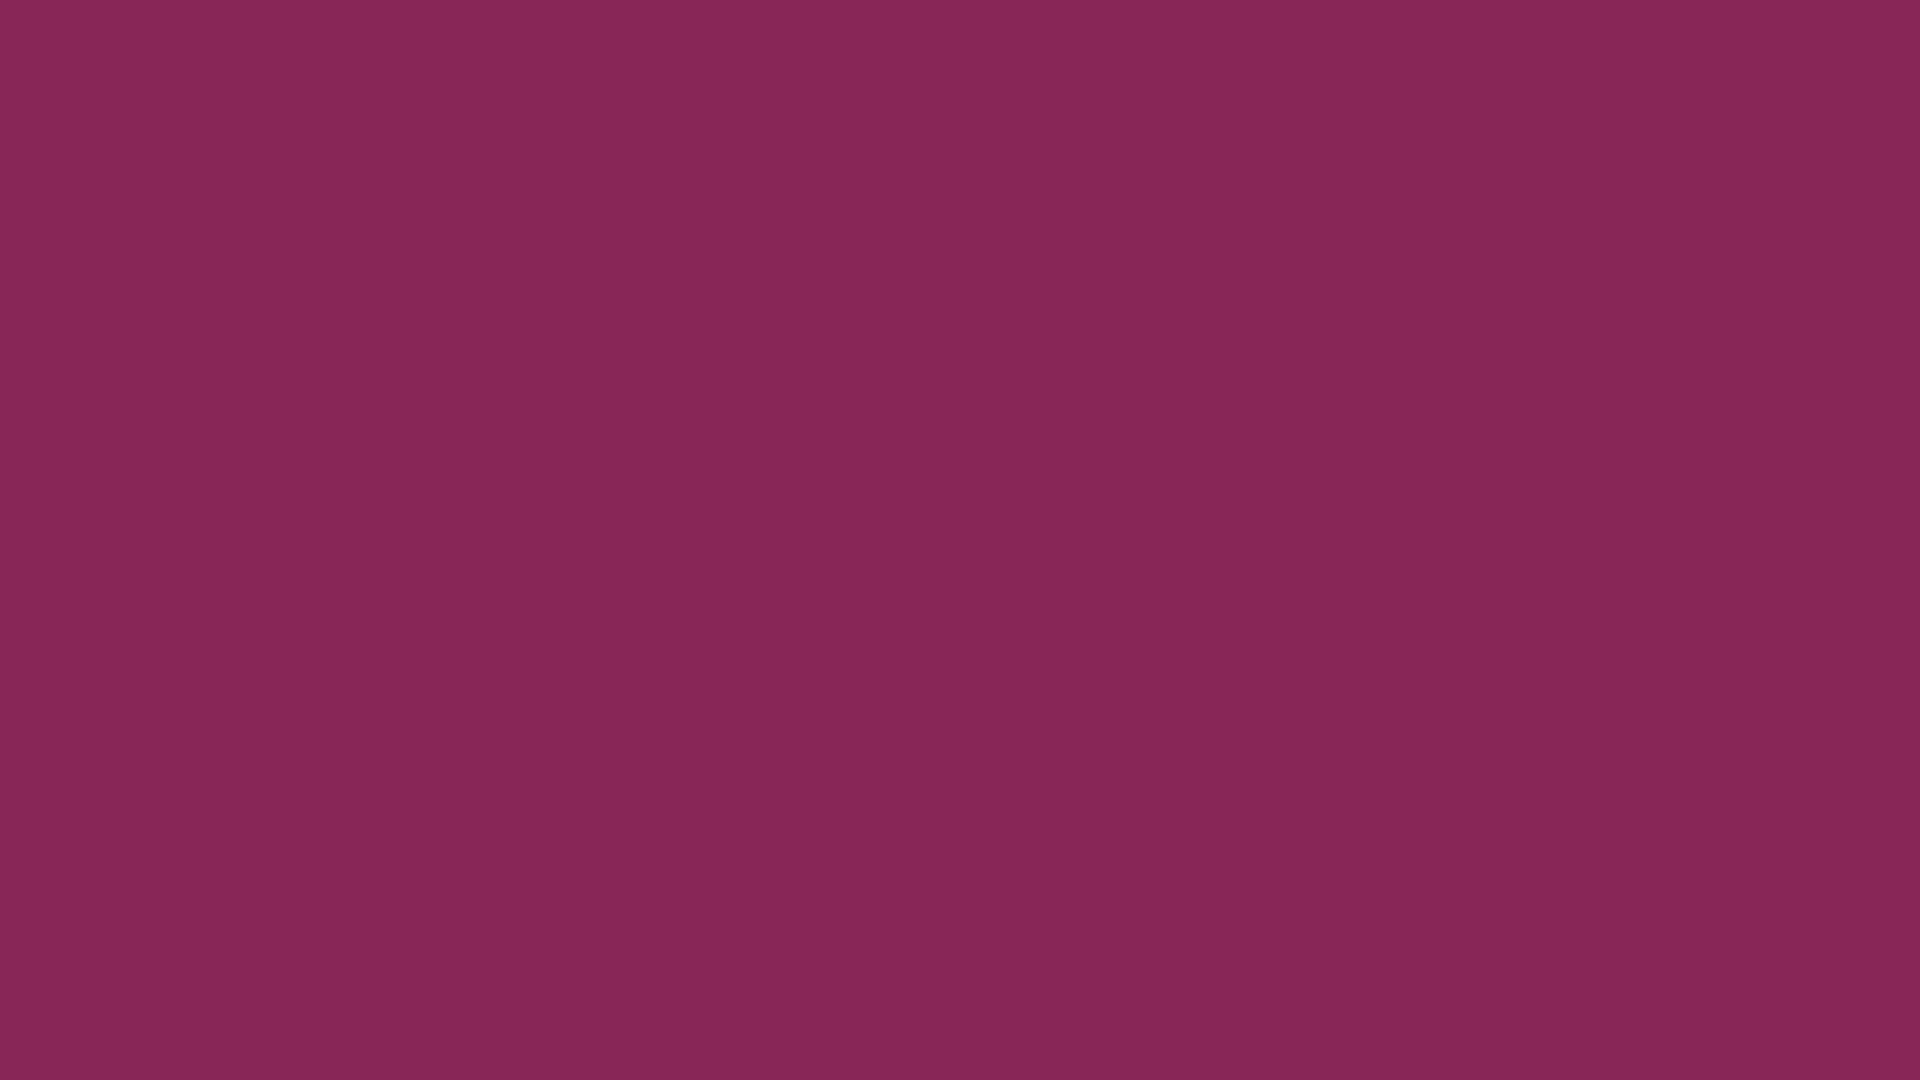 Free resolution Dark Raspberry solid color background, view